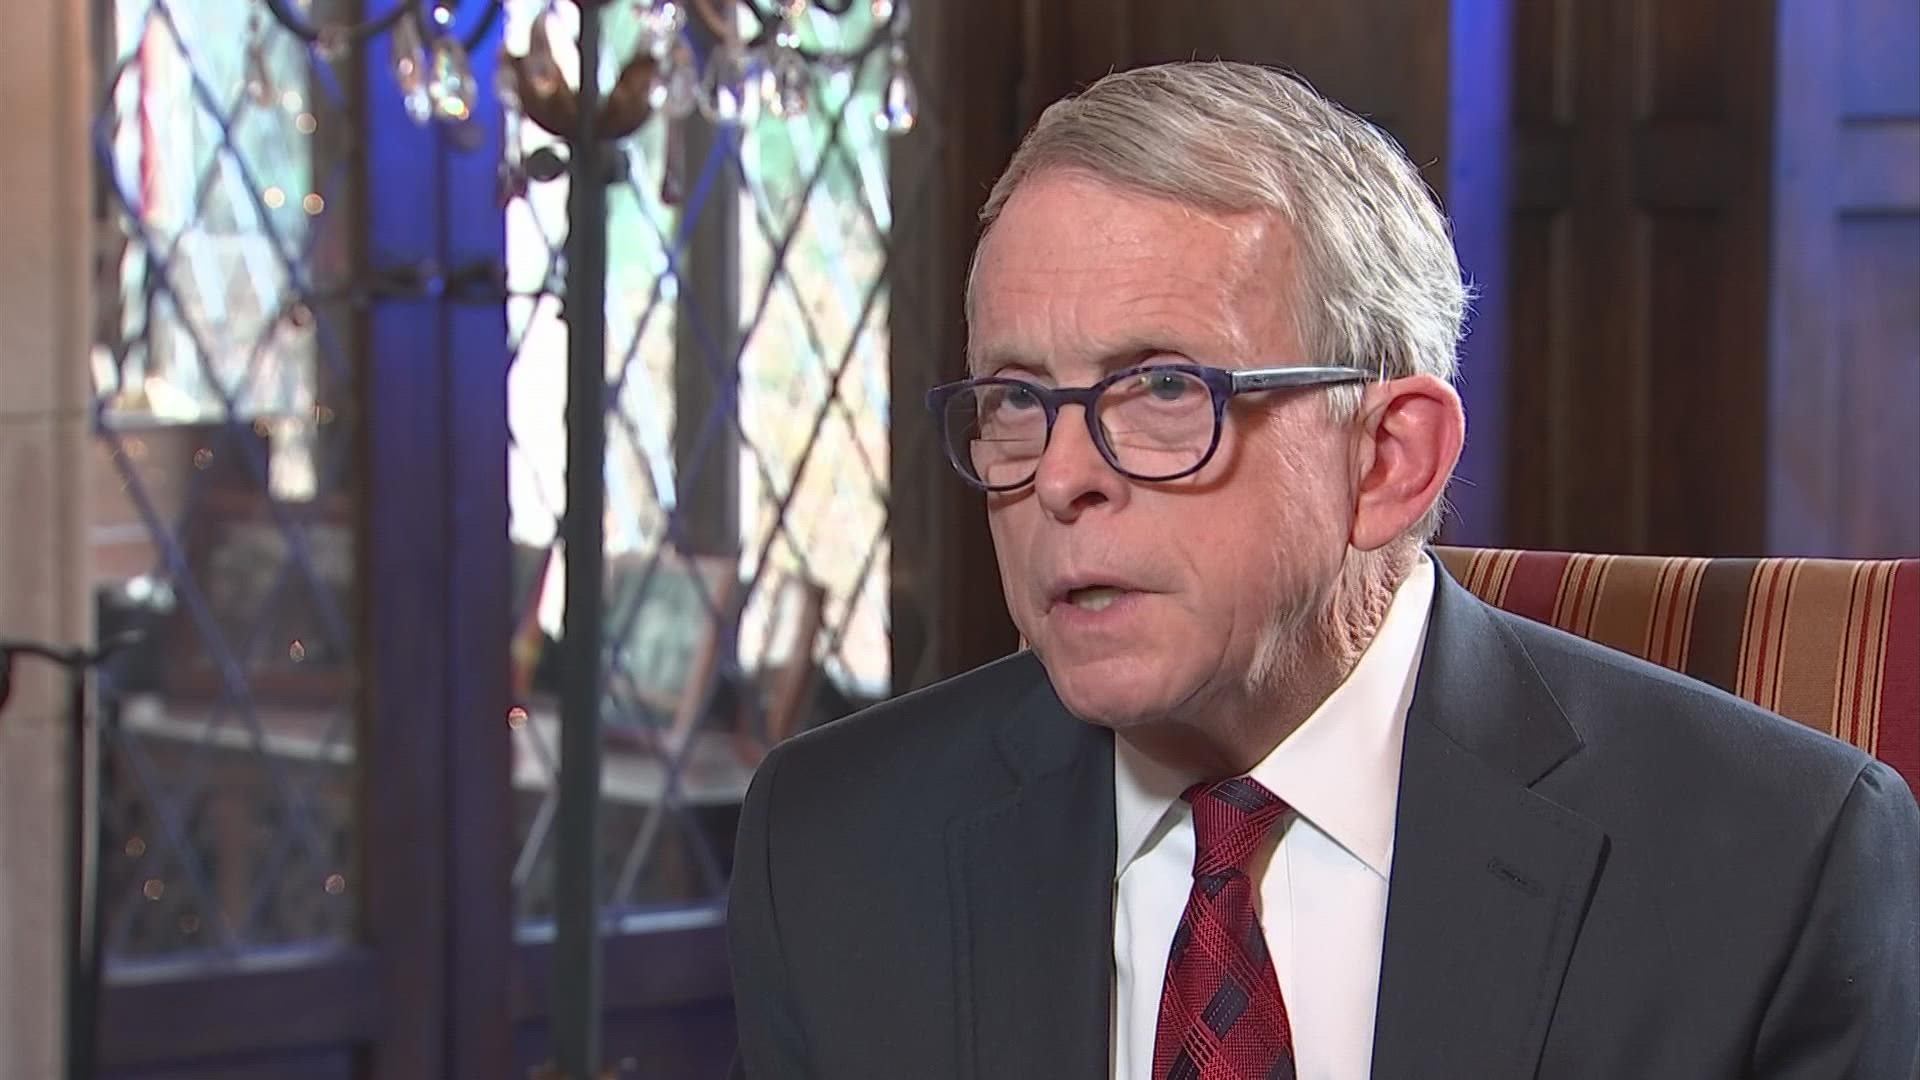 On top of asking schools to enforce masks in school, Gov. DeWine also expressed concern for the low level of vaccination rates in rural counties.